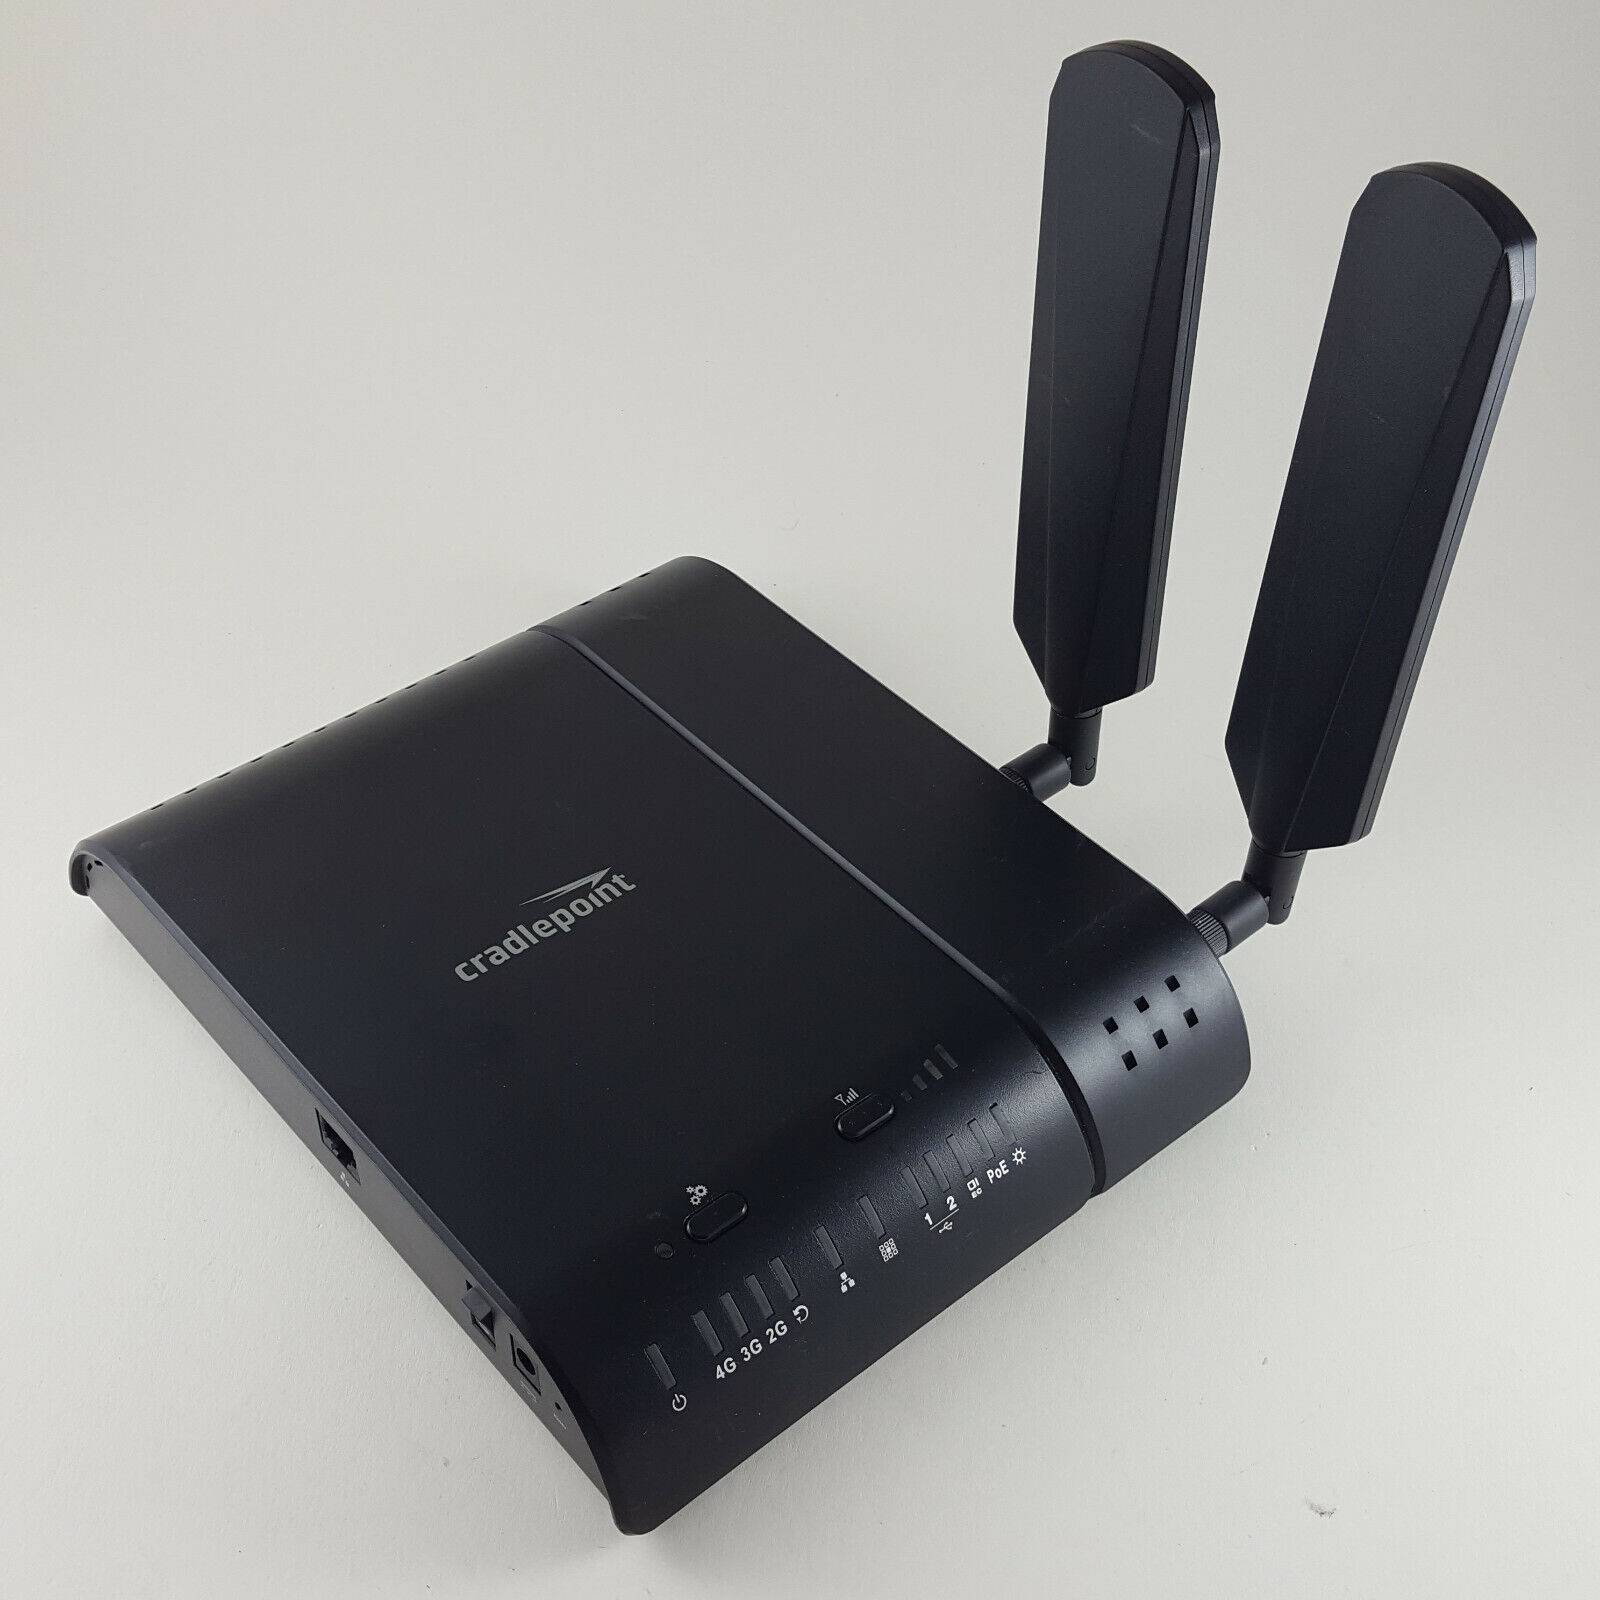 Cradlepoint CBA750B Router With Attached MC200LE-VZ Modem 3G/4G Wireless - No AC